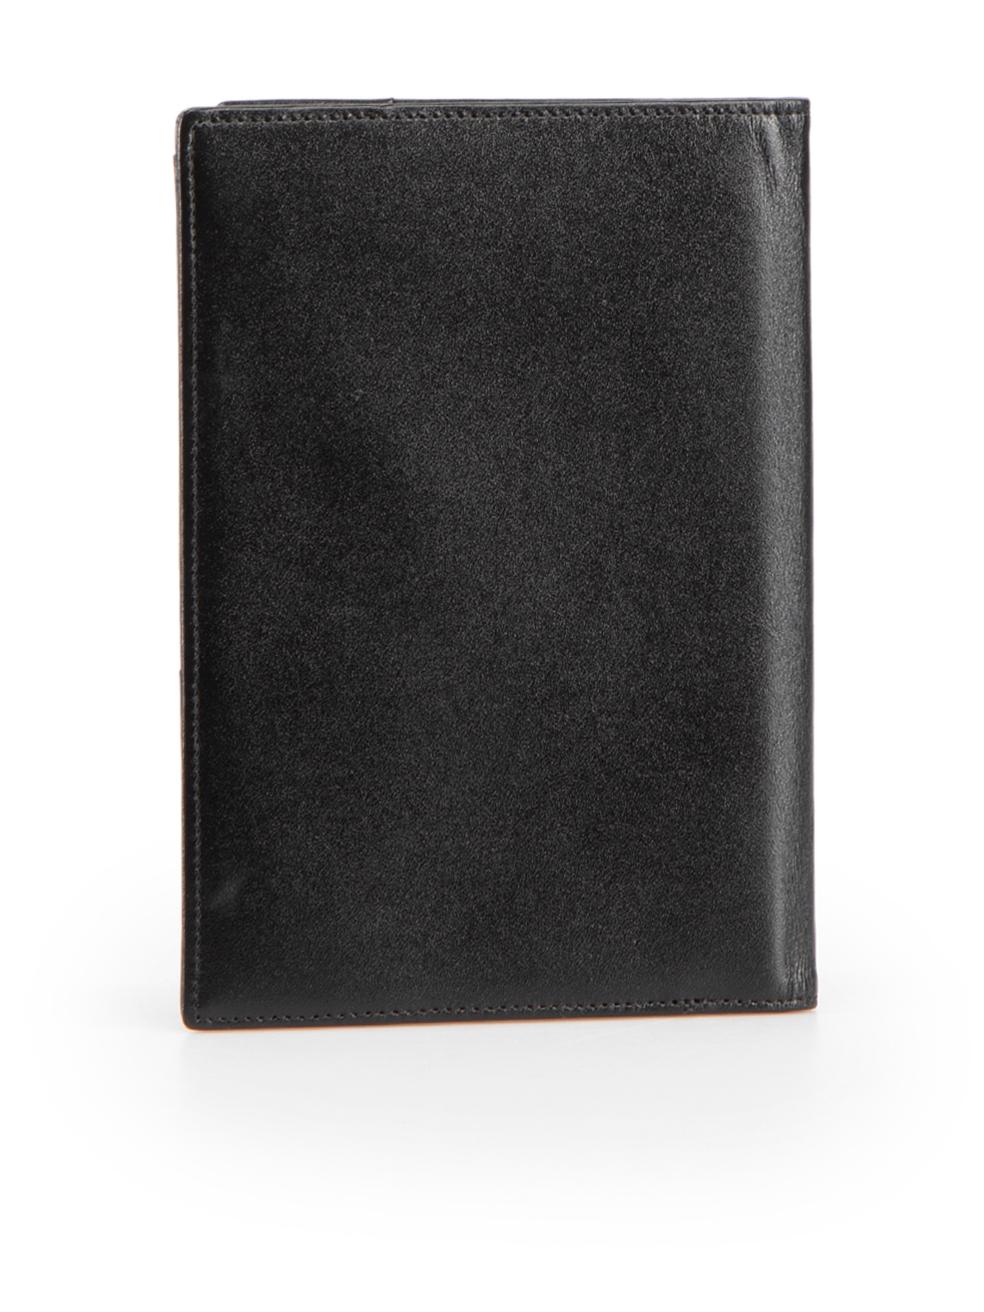 Montblanc Black Leather Passport Cover In Excellent Condition For Sale In London, GB